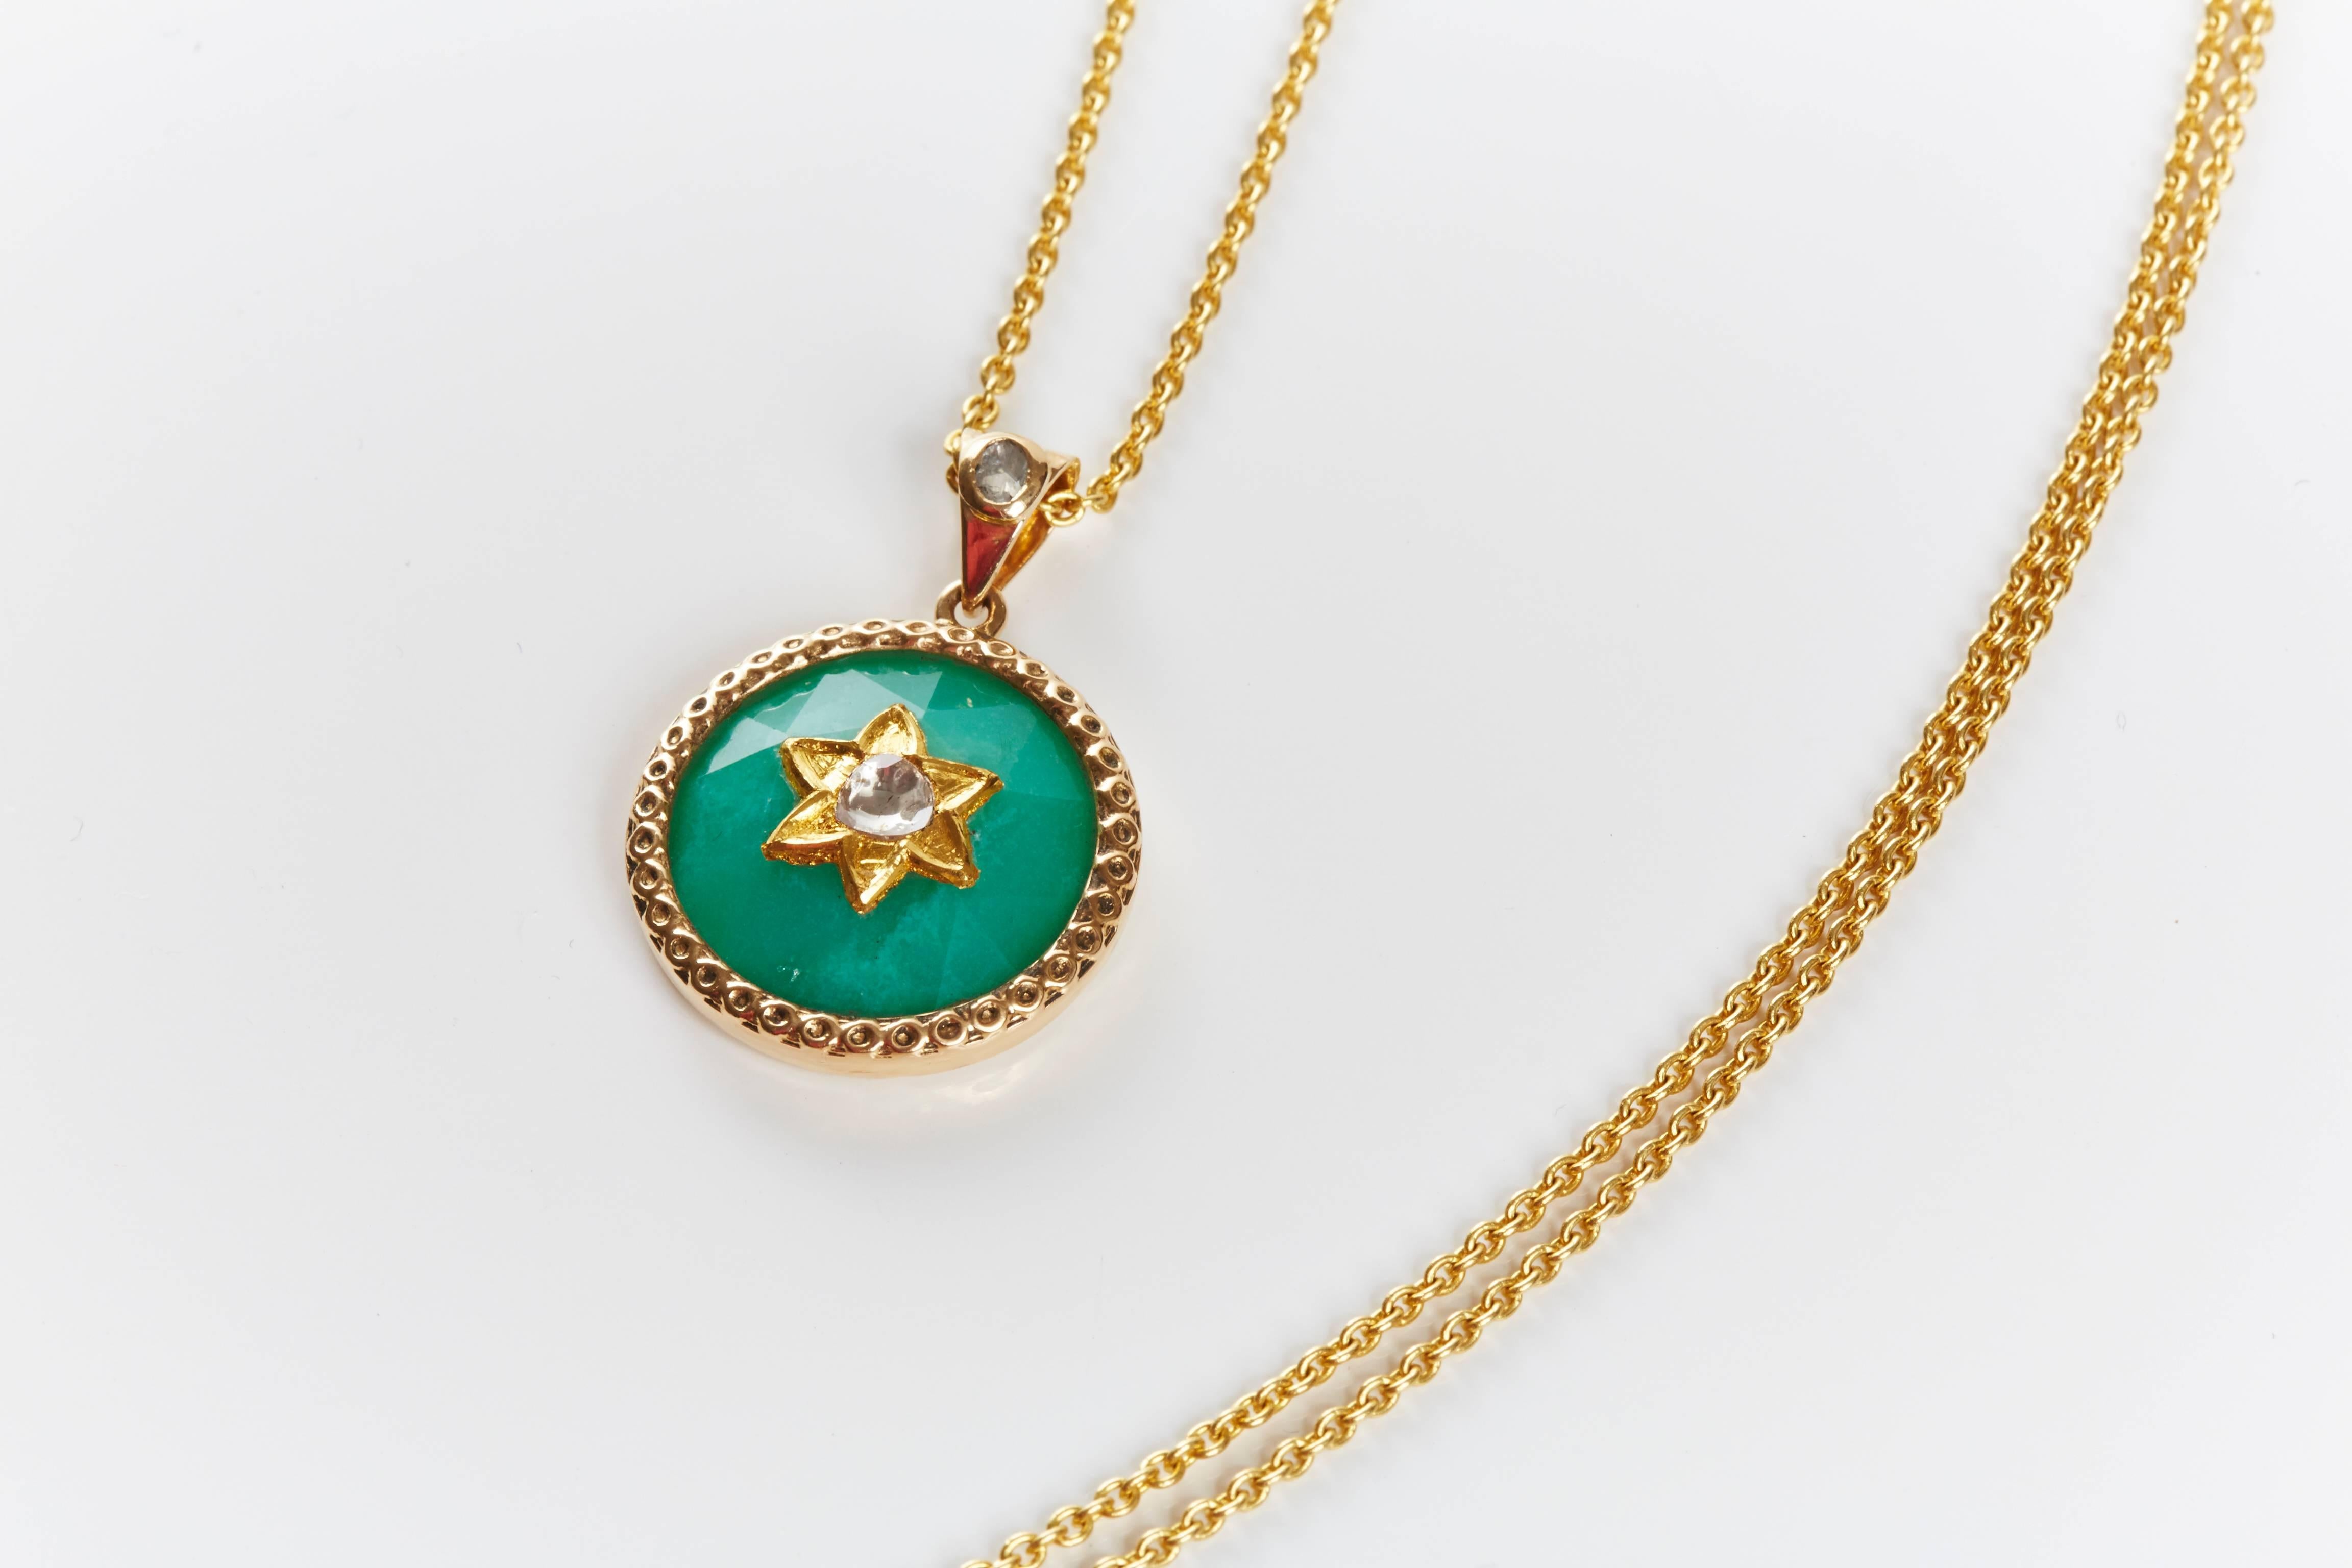 Jade Jagger chrysoprase polki diamond star pendant. Chain 20 inches. 18k yellow gold.
From the Jaipur Fine Jewellery Collection.
Handmade in Jaipur, India.
Chrysoprase 22 ct. 
Diamond 1.6 ct.